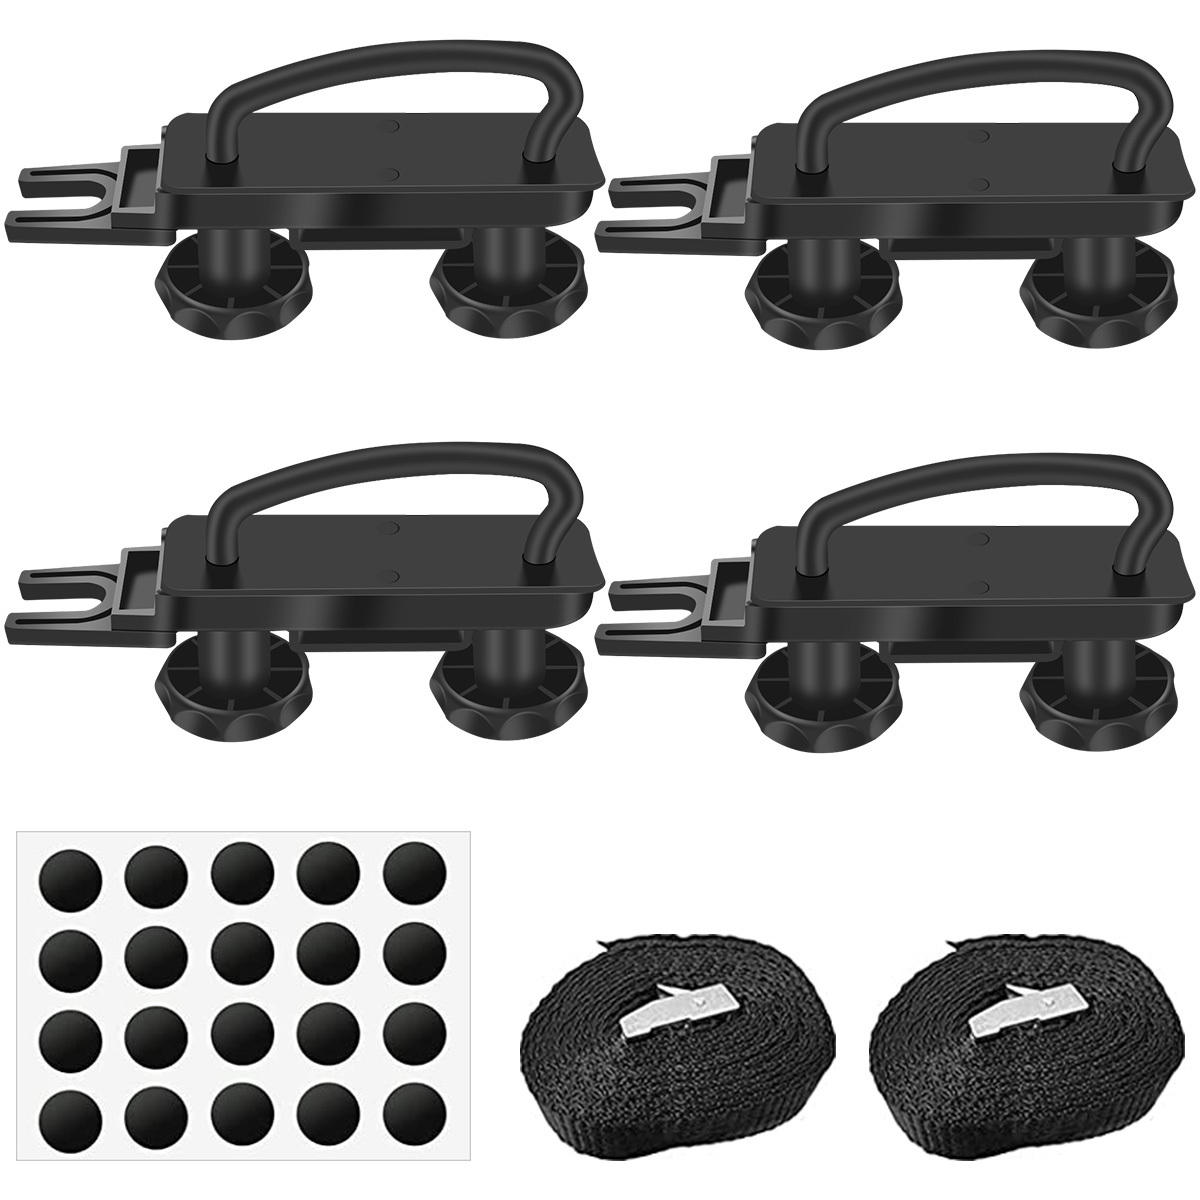 4x Universal Roof Box U-Bolt Clamps Cargo Carrier Roof Rack